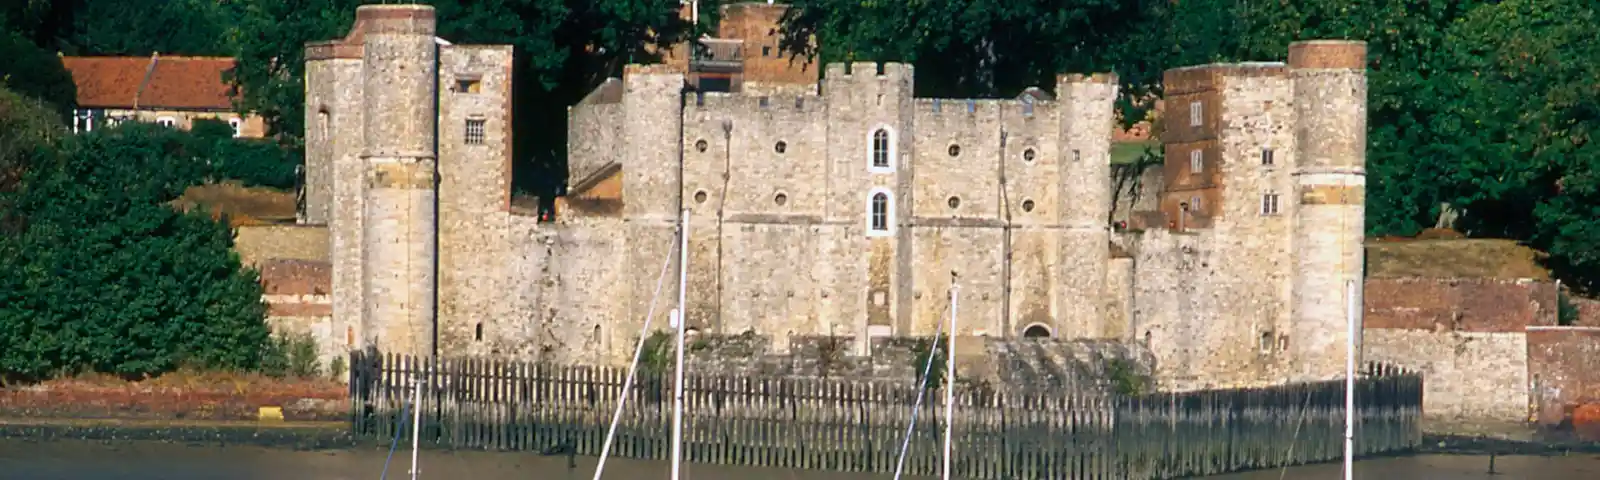 upnor from the river.jpg